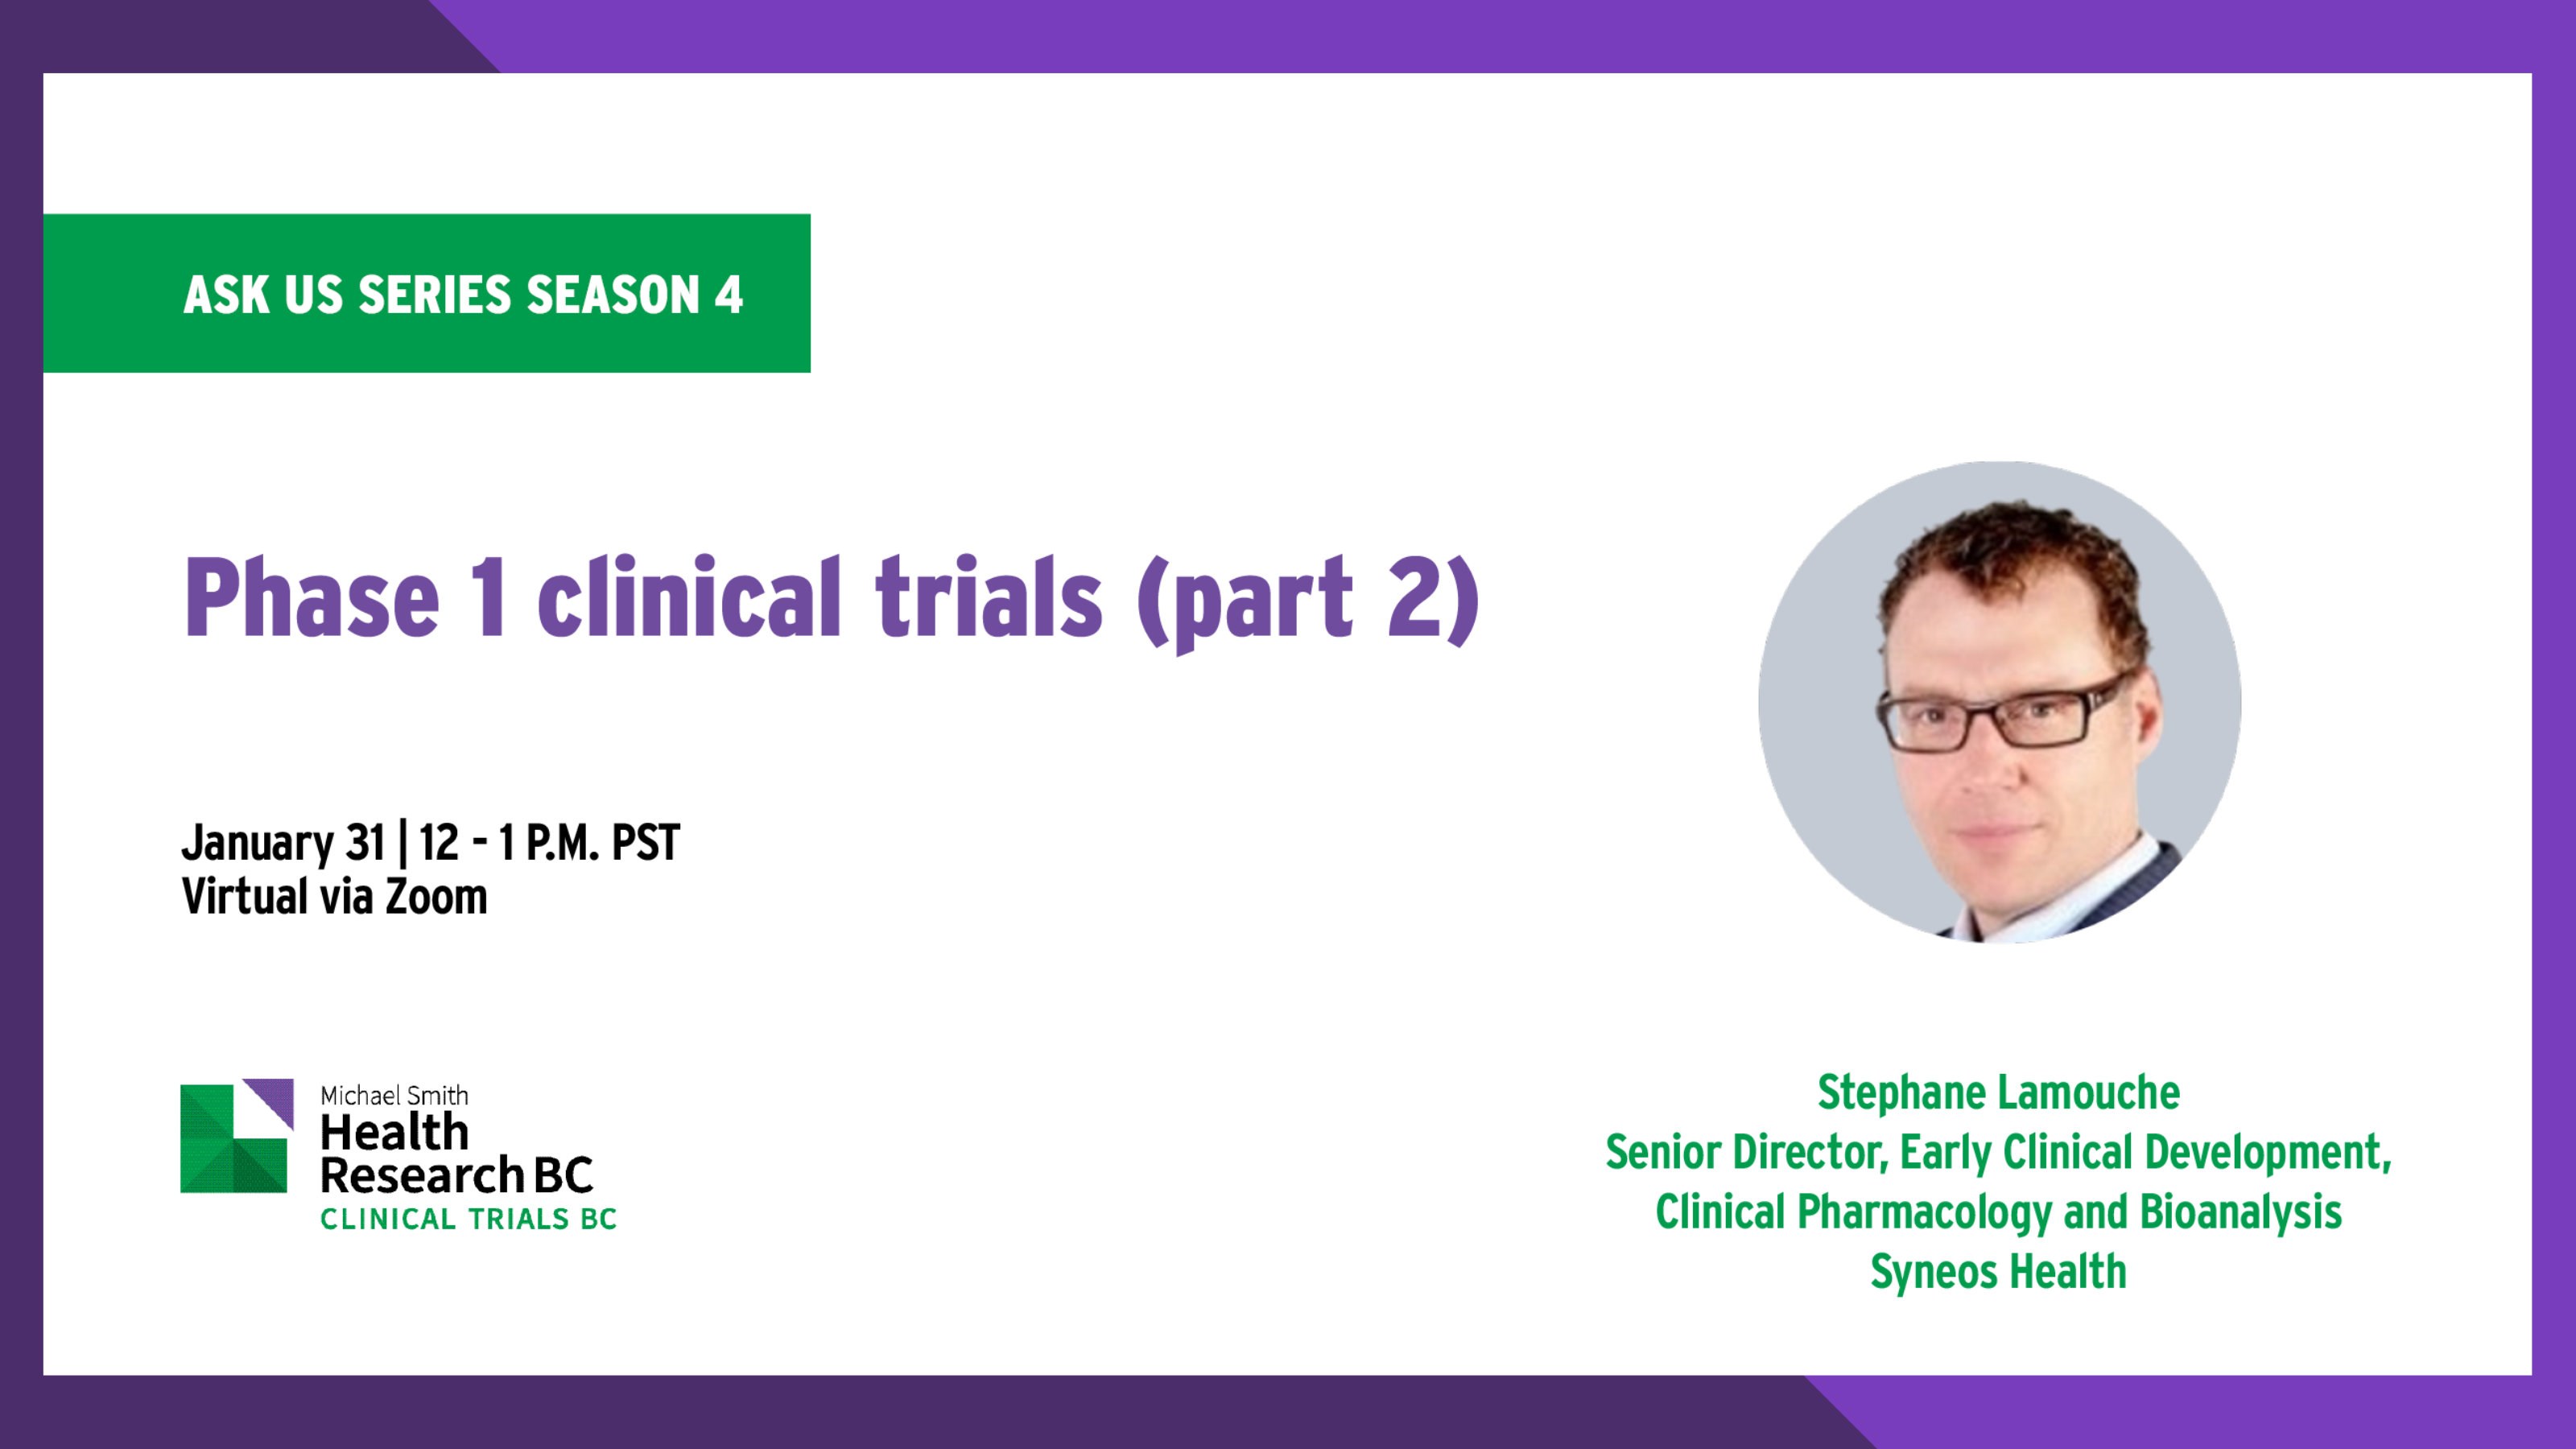 ASK US series: Phase 1 clinical trials (part 2)